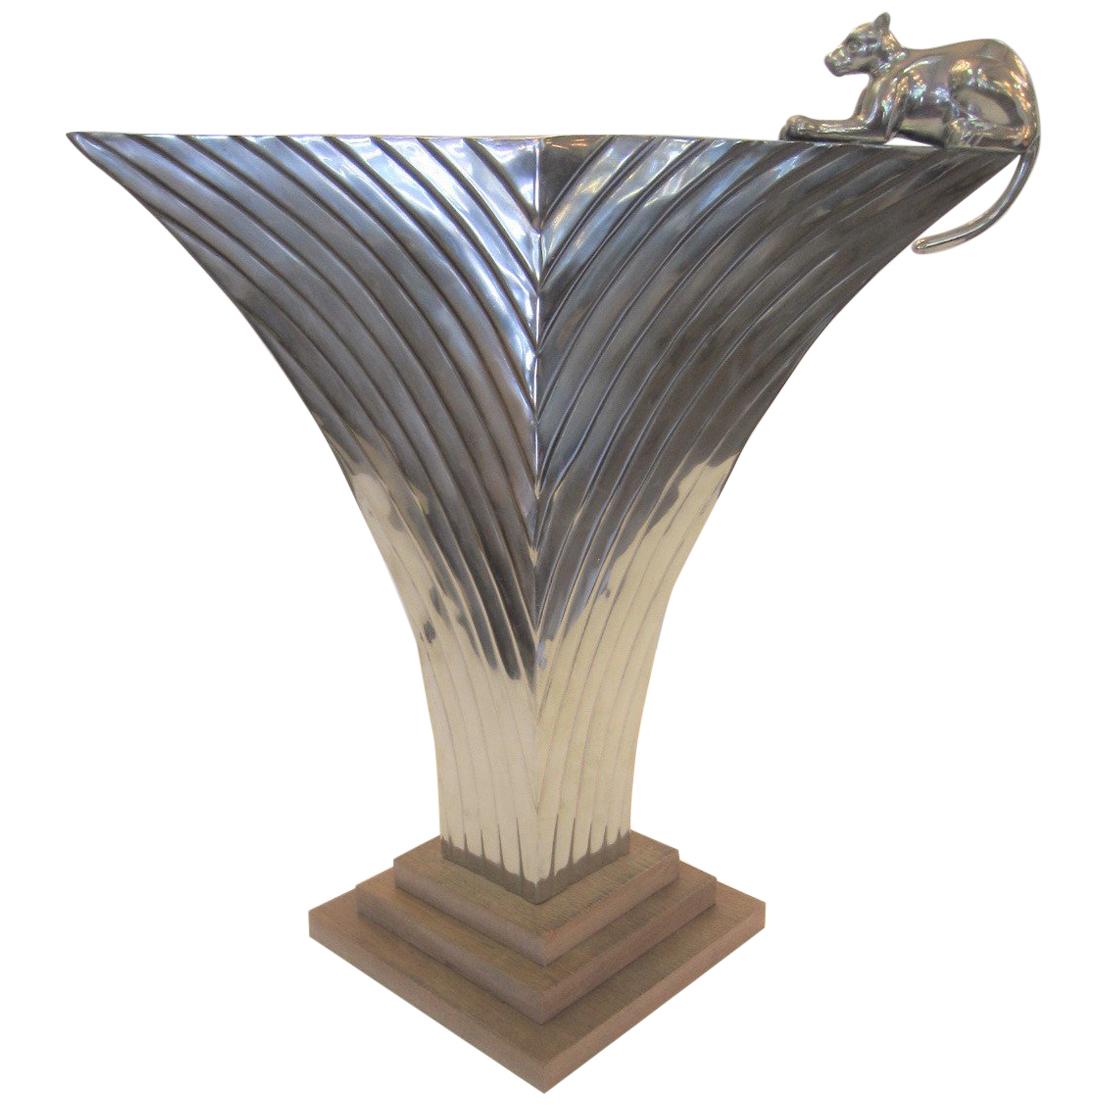 Very Large Art Deco Revival Fluted Nickelled Brass Vase with Panther